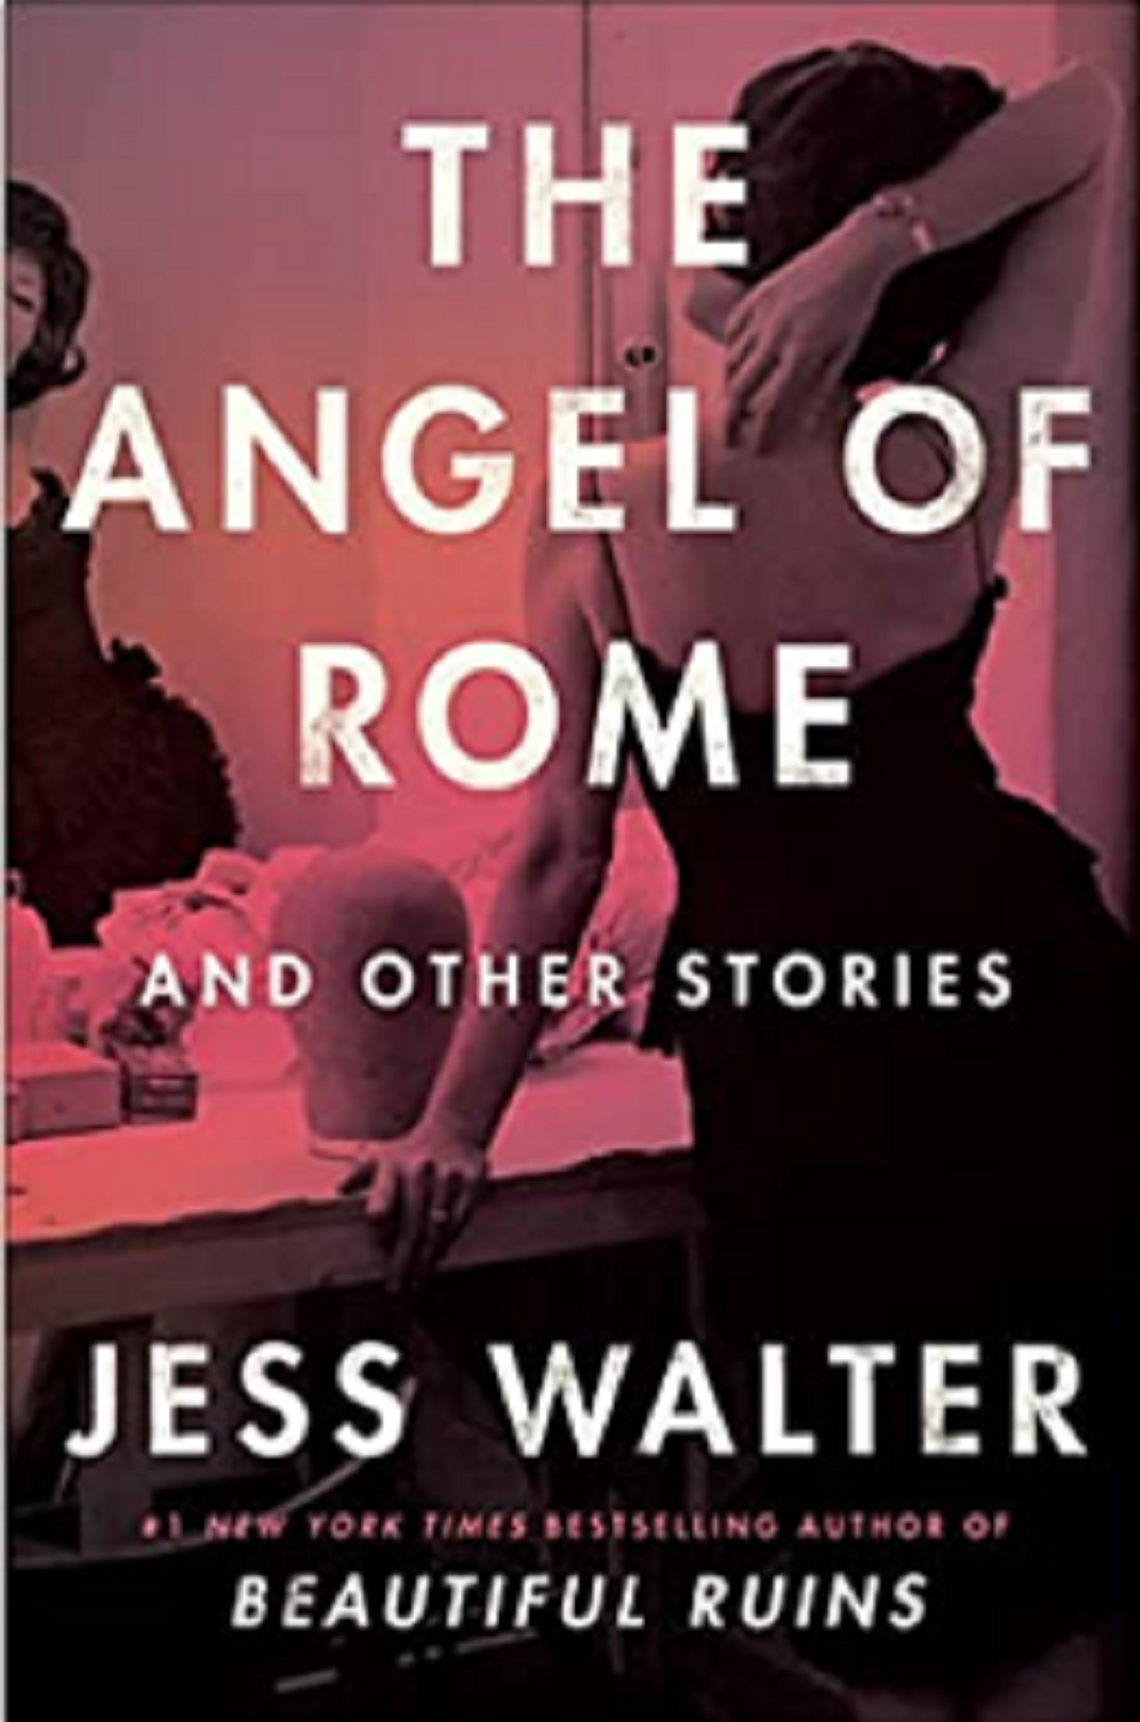 The Angel of Rome and Other Stories by Jess Walter